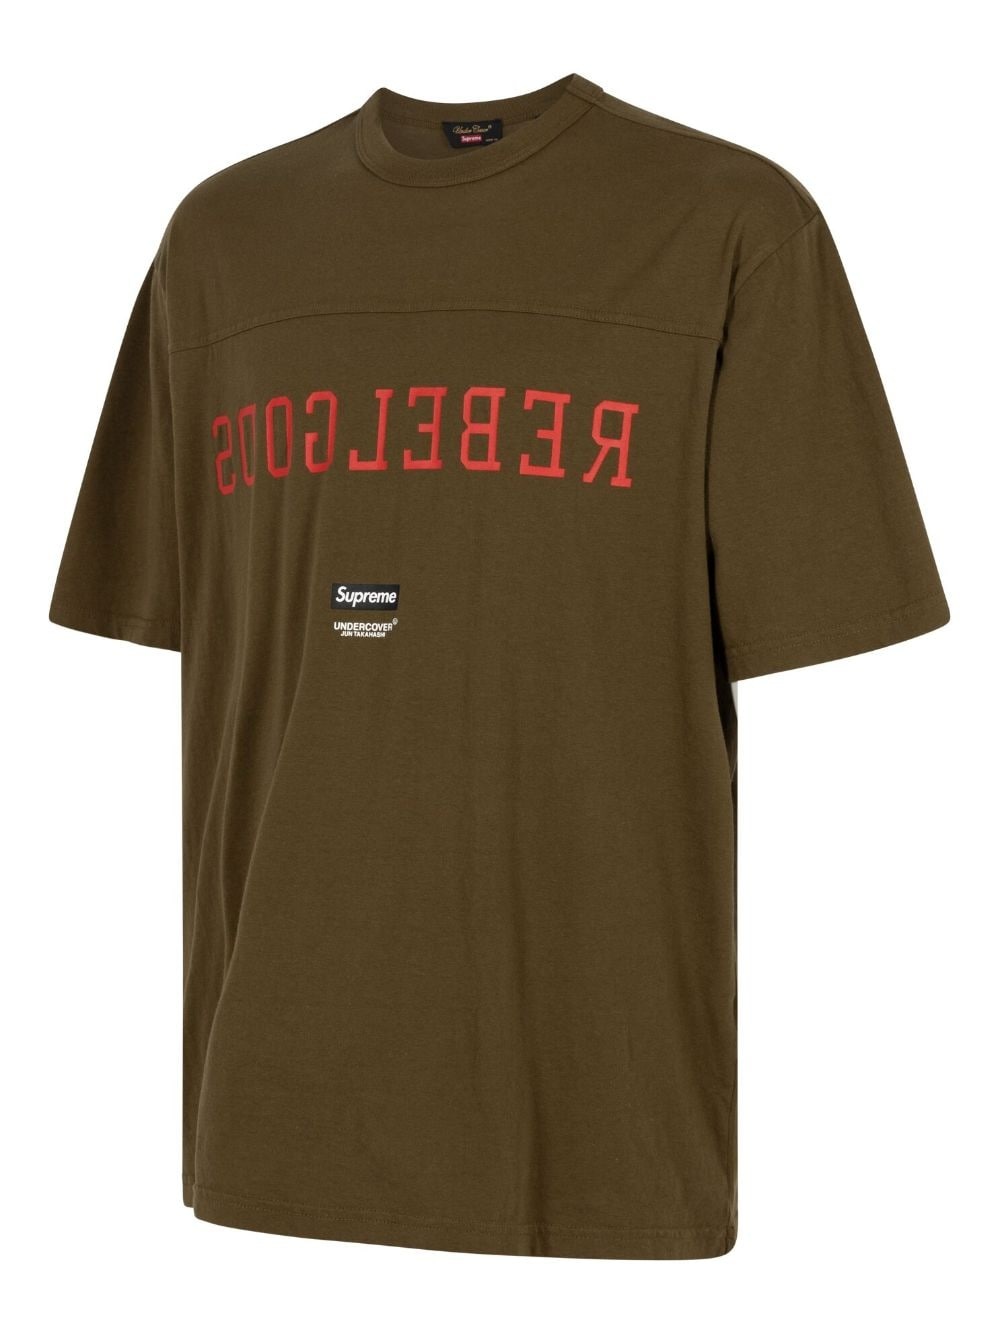 Undercover Football "Olive" T-shirt - 2